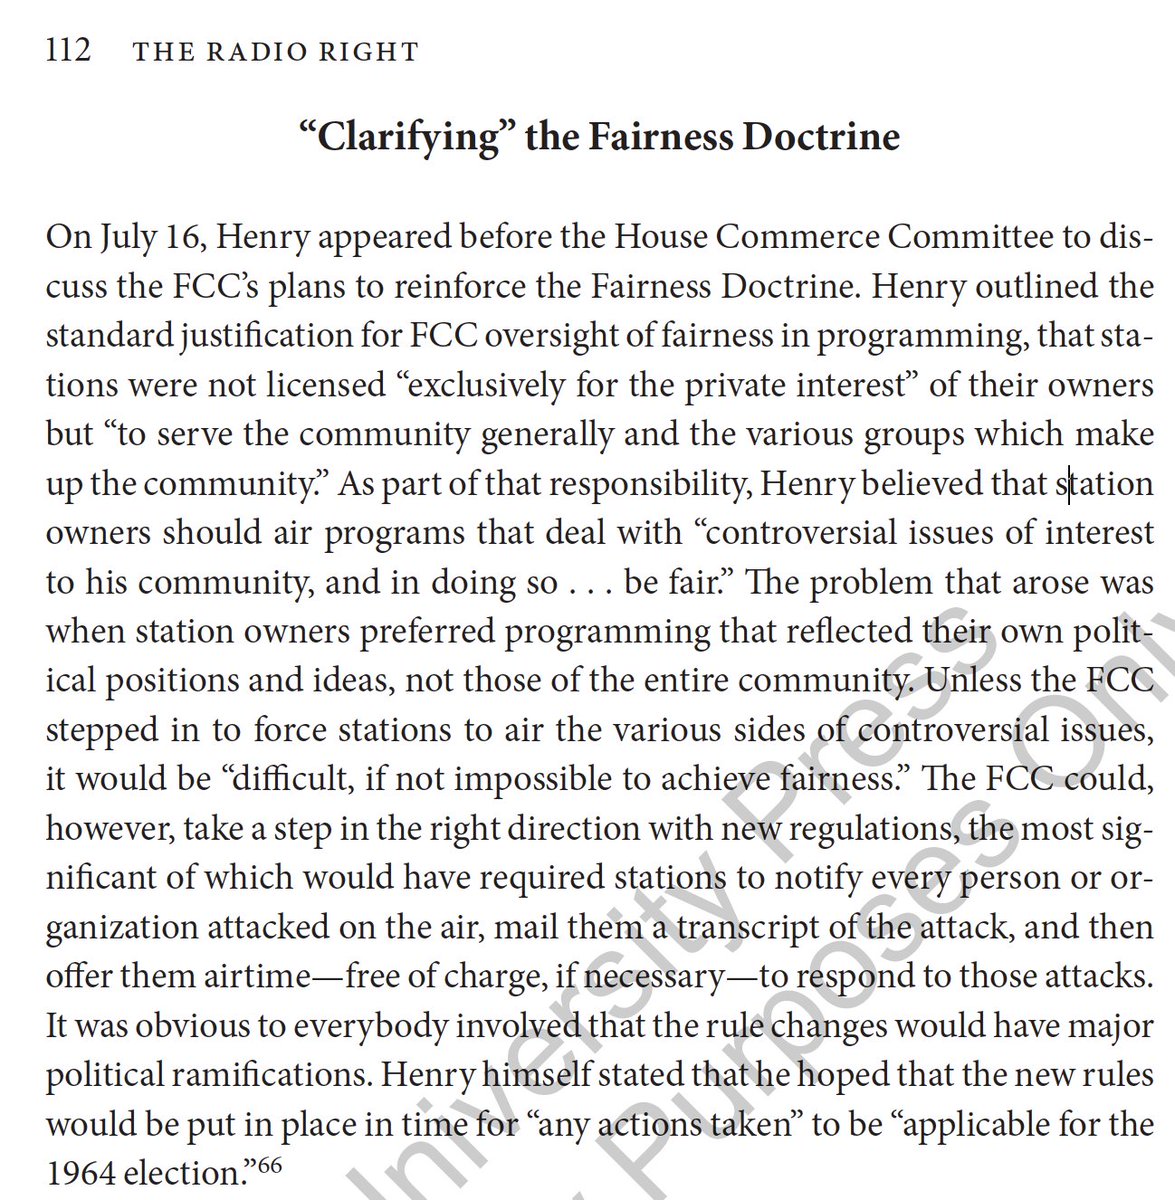 But Henry’s statement focused on negative examples conservative speech.Also, note how similar Henry’s rhetoric is to that of contemporary conservative arguments about how social media platforms have public obligations and ought not to favor any particular point of view.